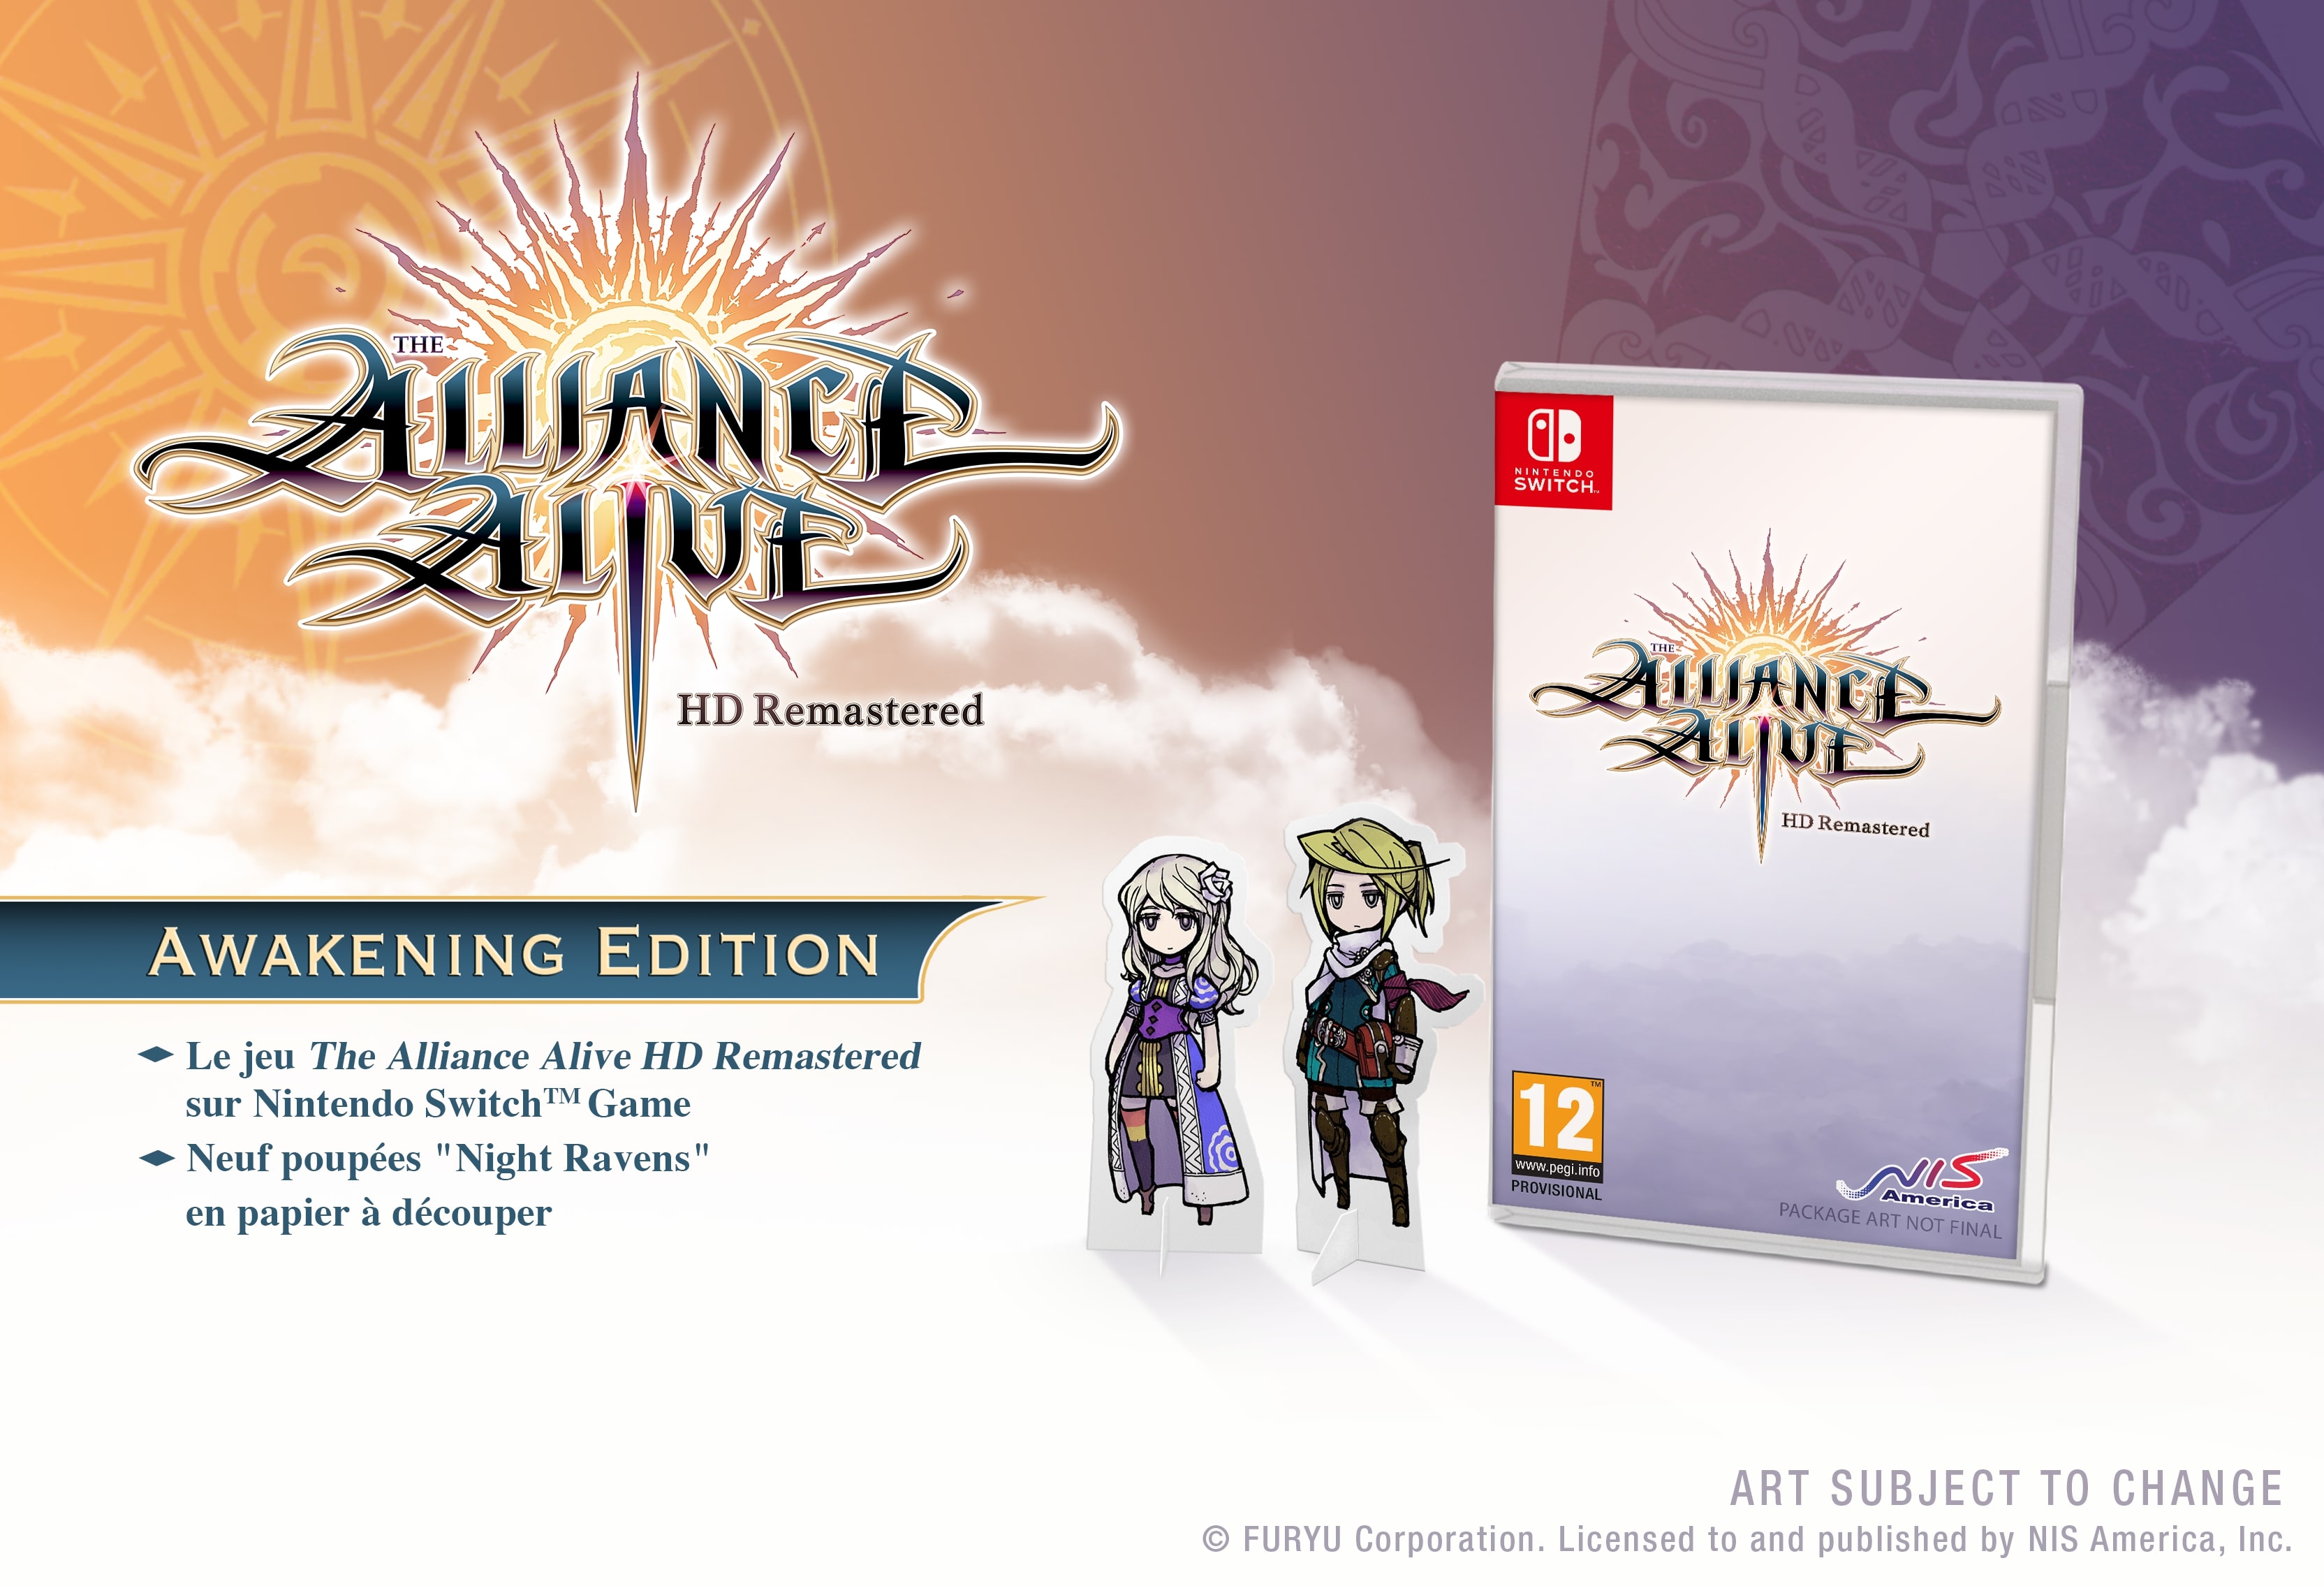 The alliance alive hd remastered 7 7